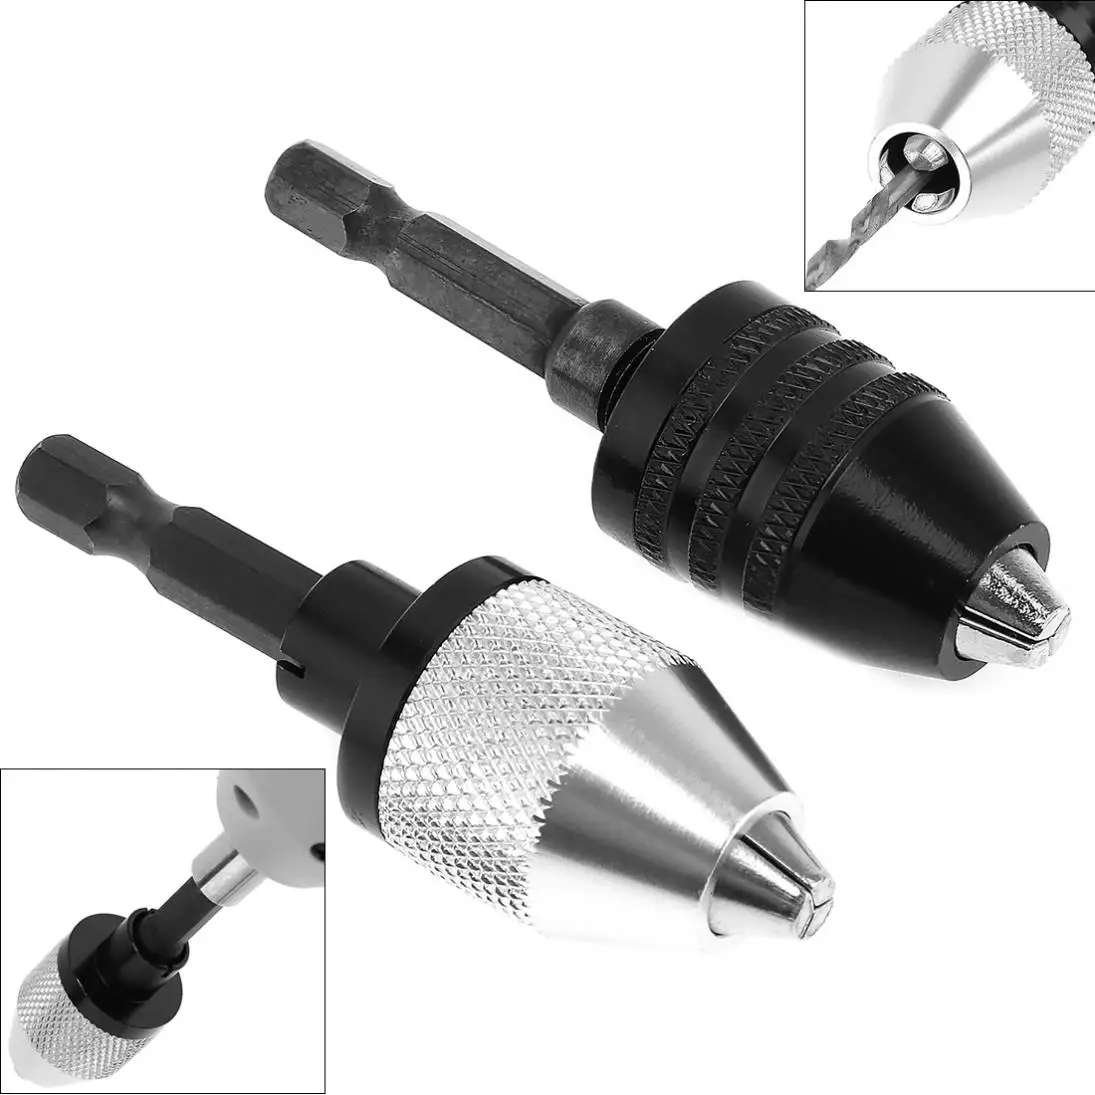 0.3-6.5mm Twist Drill Chuck Electric Grinder Screwdriver Impact Driver Adapter 